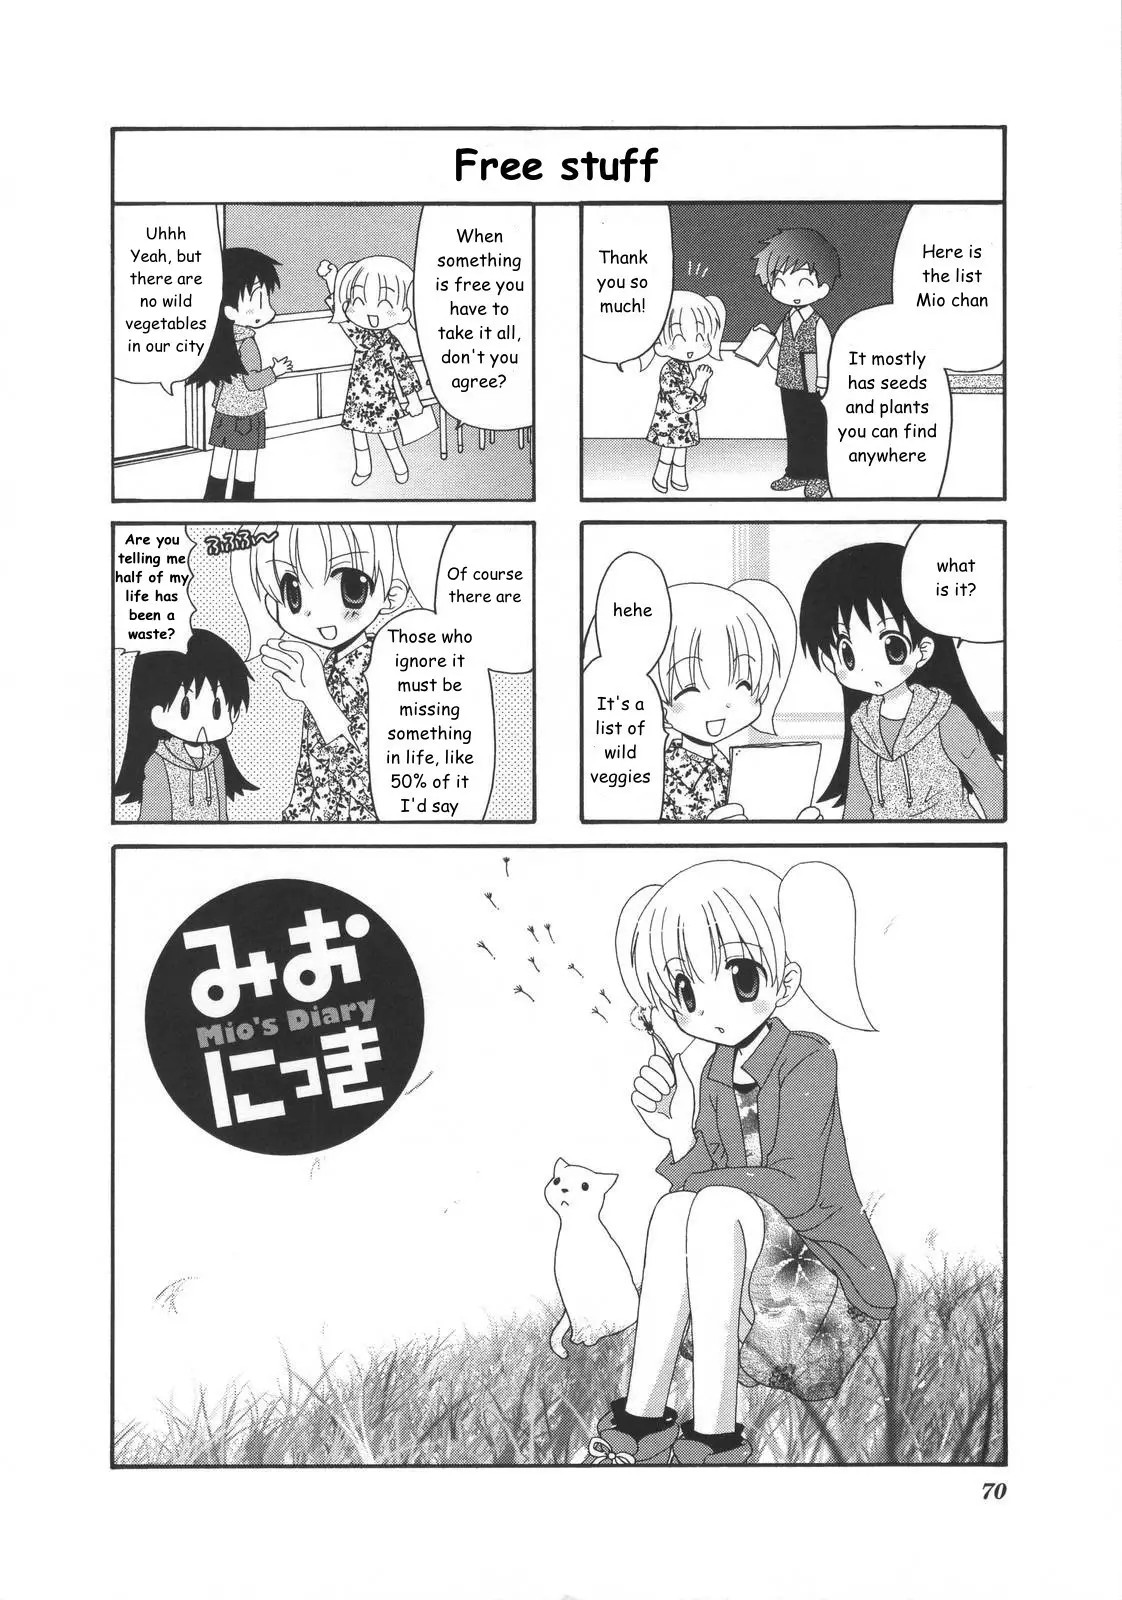 Mio's Diary - 17 page 1-c908d2d3